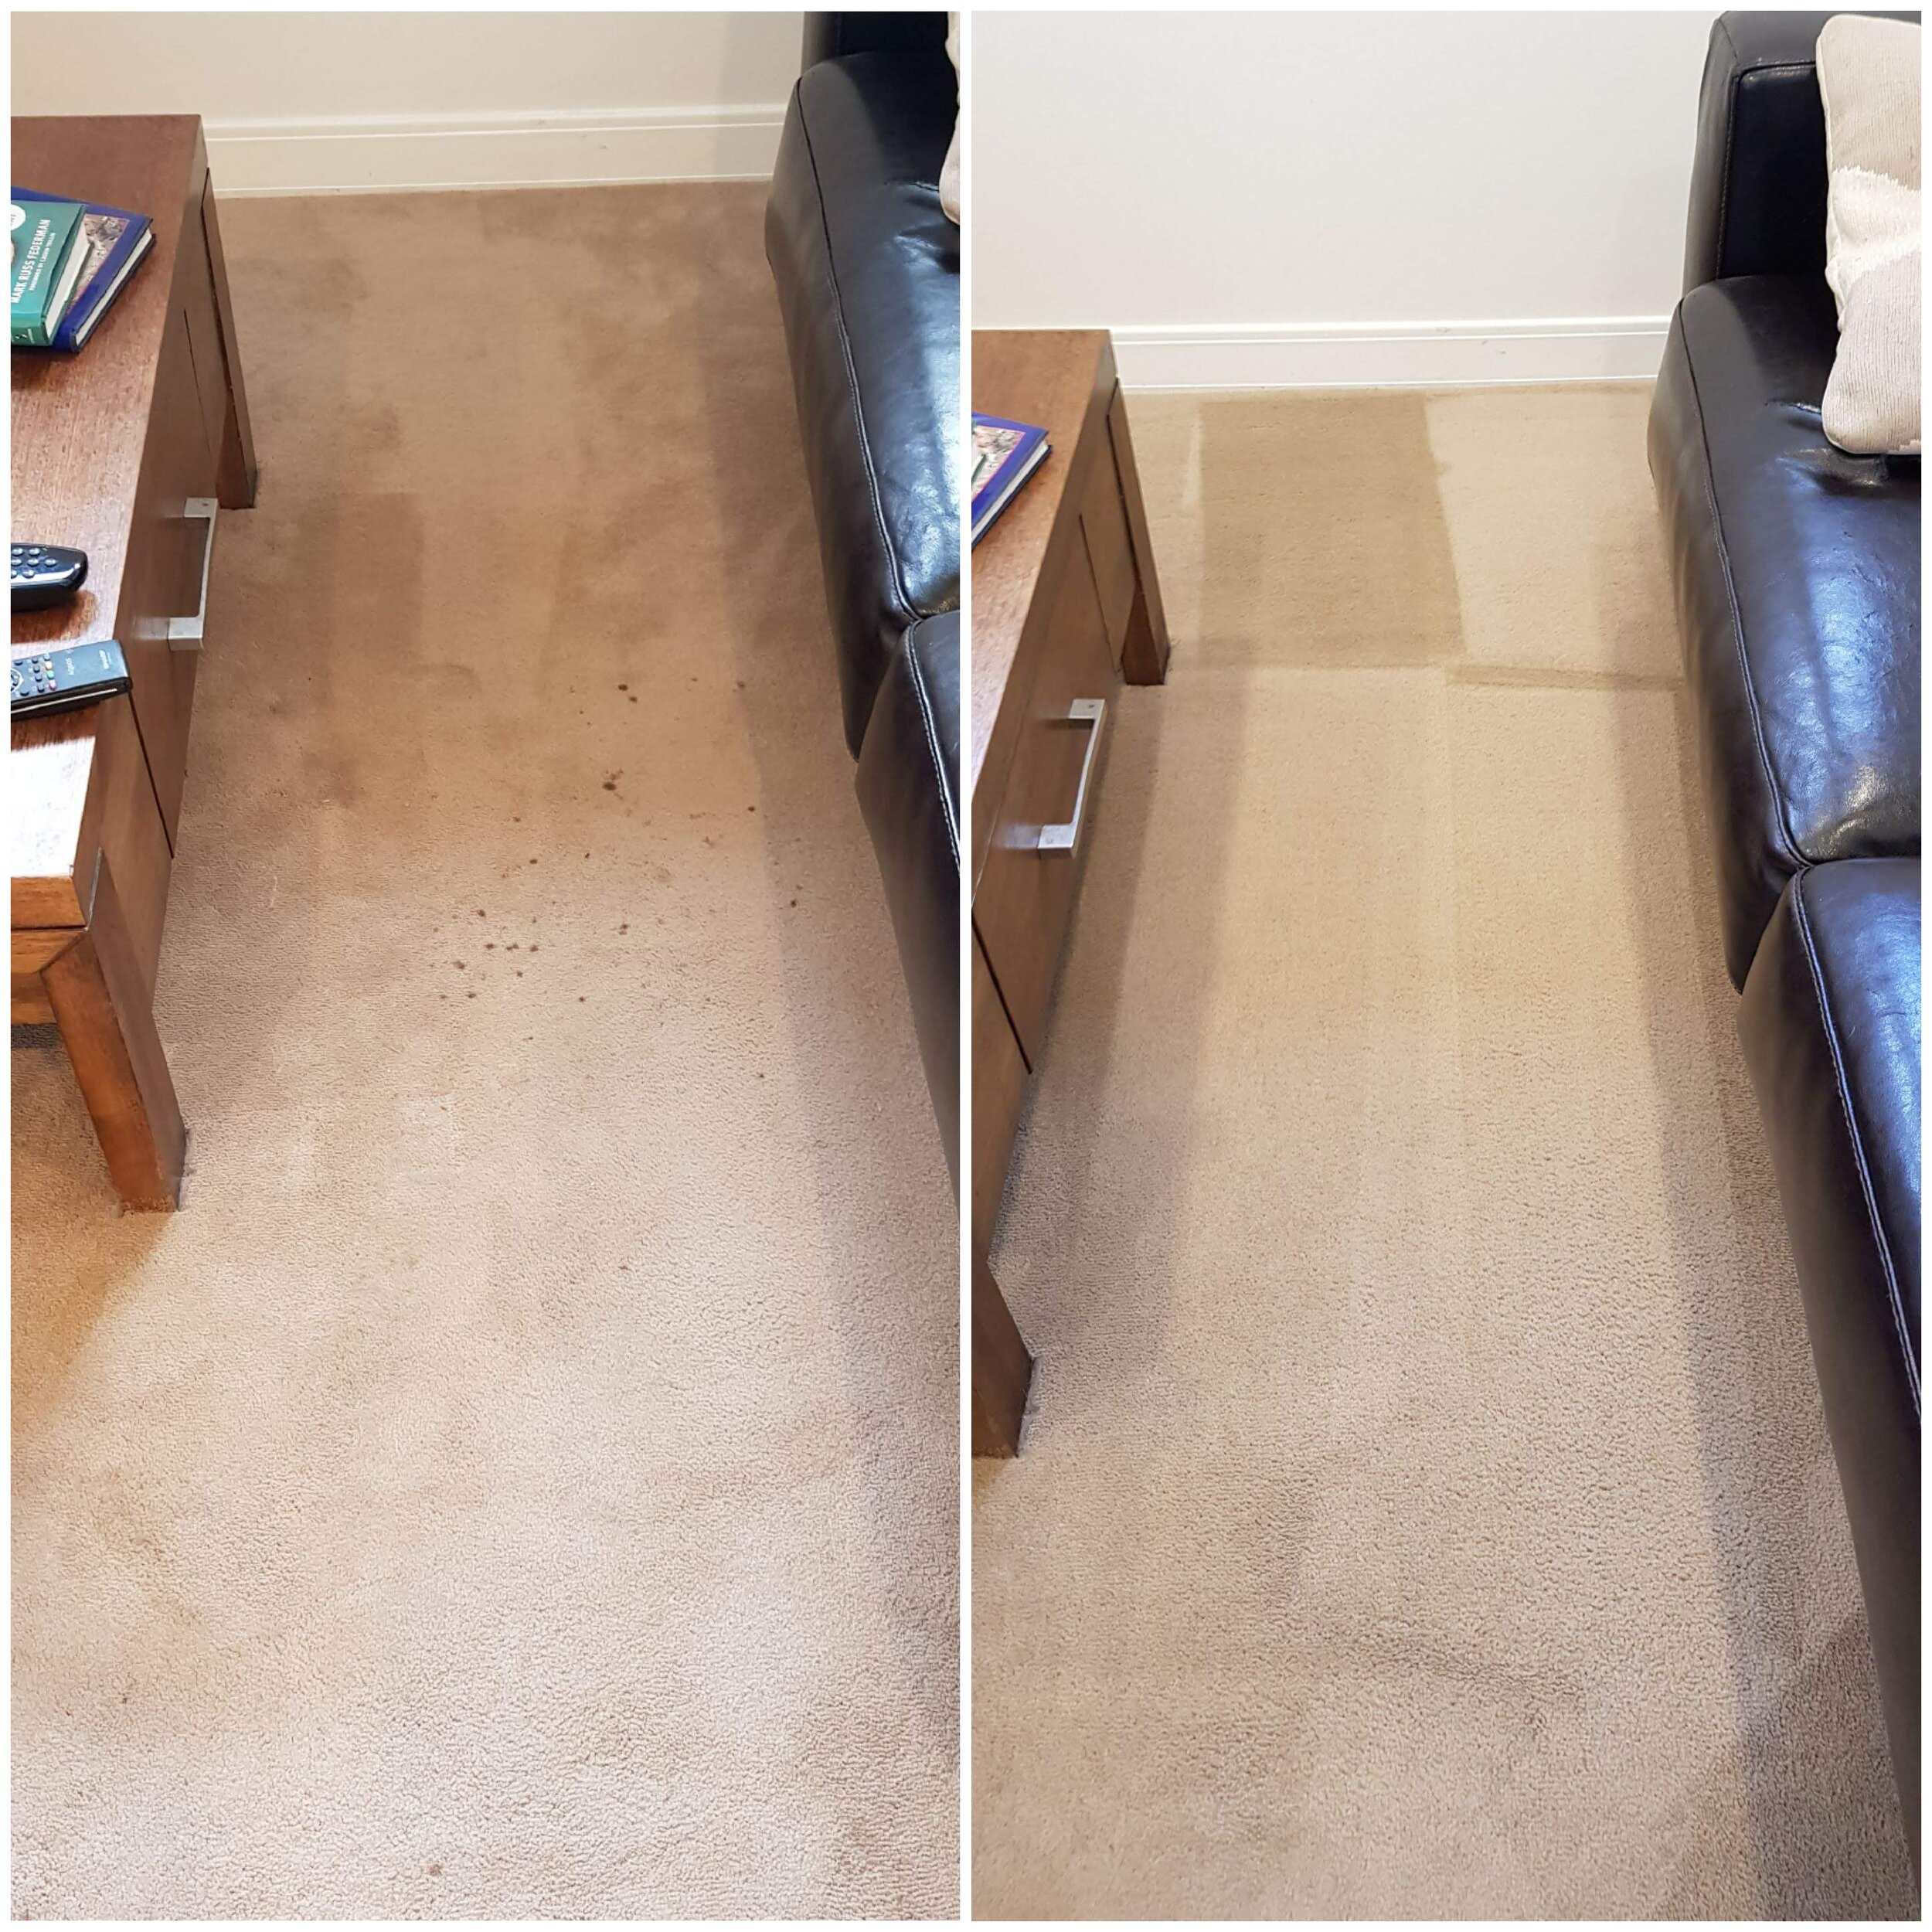 How to get dried dog pee out of carpet?<br/> — Fresh Zest Carpet Care